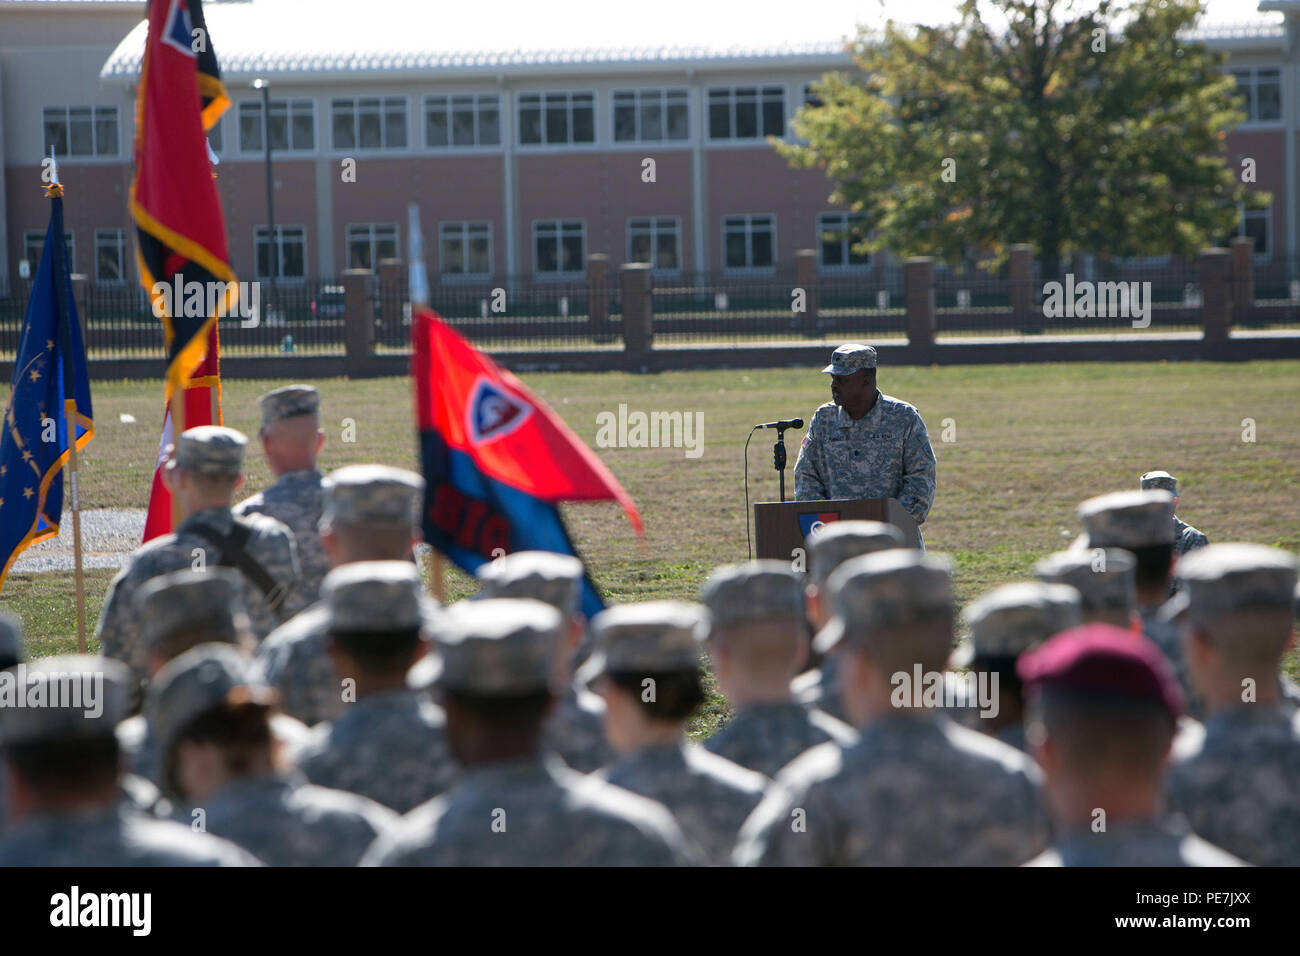 Indiana Army National Guard Lt. Col. Walter Finney speaks at the change of ceremony for the 38th Infantry Division’s headquarters battalion in Indianapolis, Saturday, Oct. 17, 2015. Finney relinquished command to Lt. Col. David Skalon. (Photo by Sgt. 1st Class Gary Nelson) Stock Photo